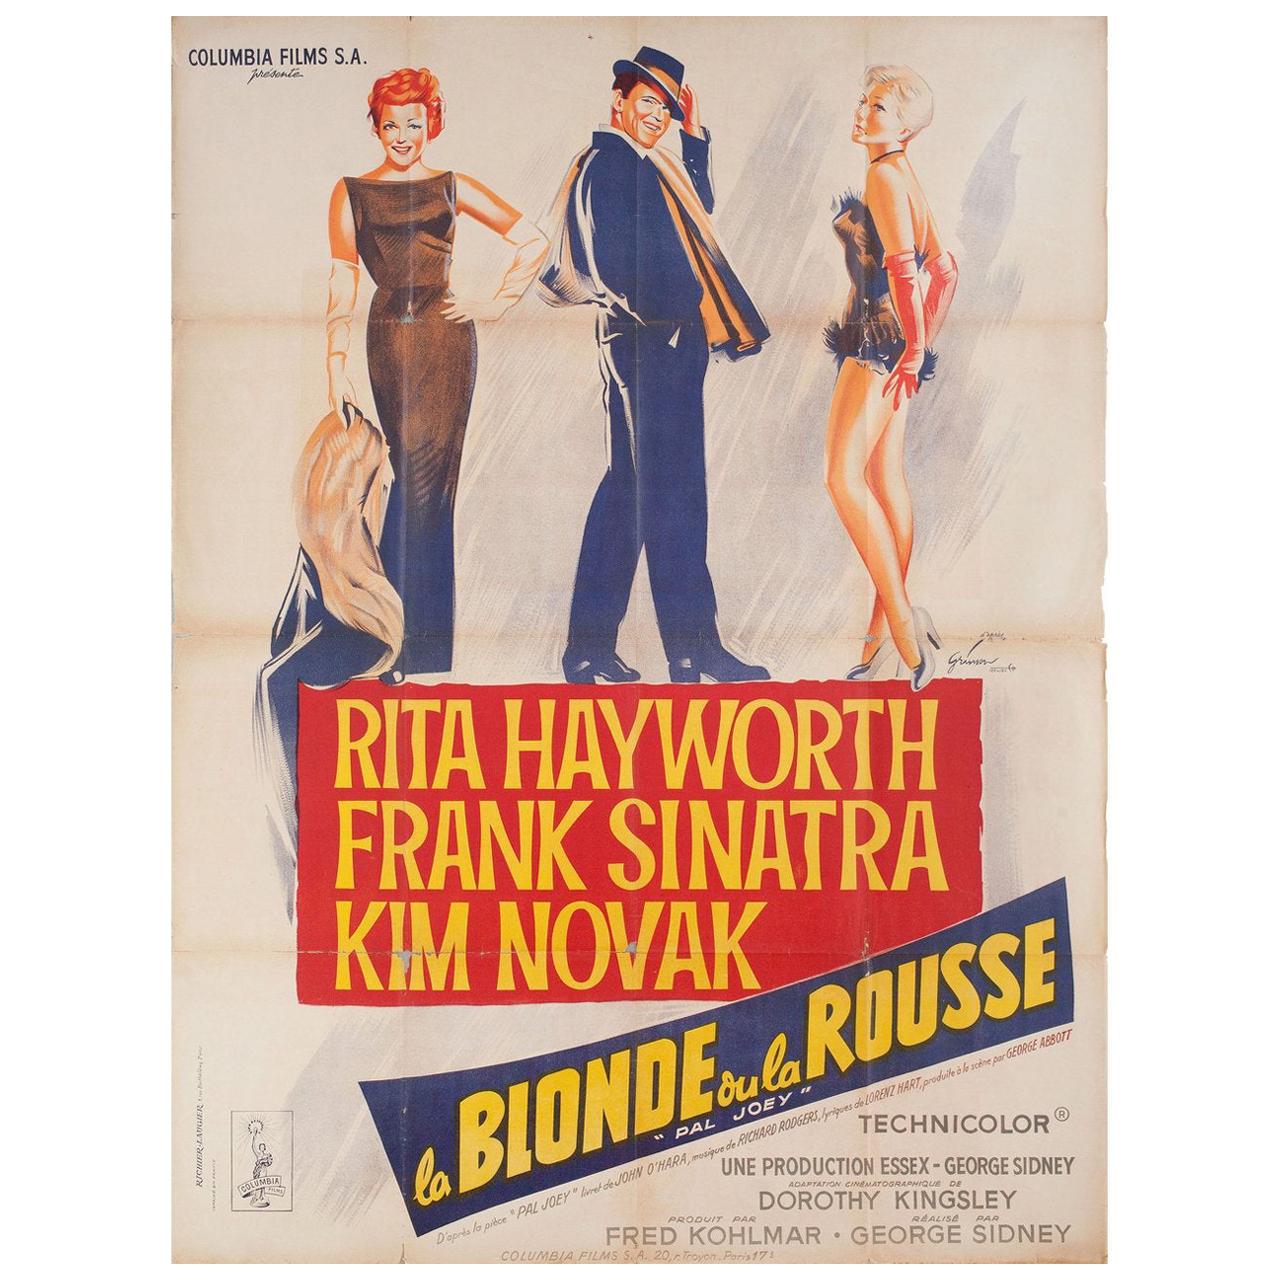 Pal Joey 1957 French Grande Film Poster